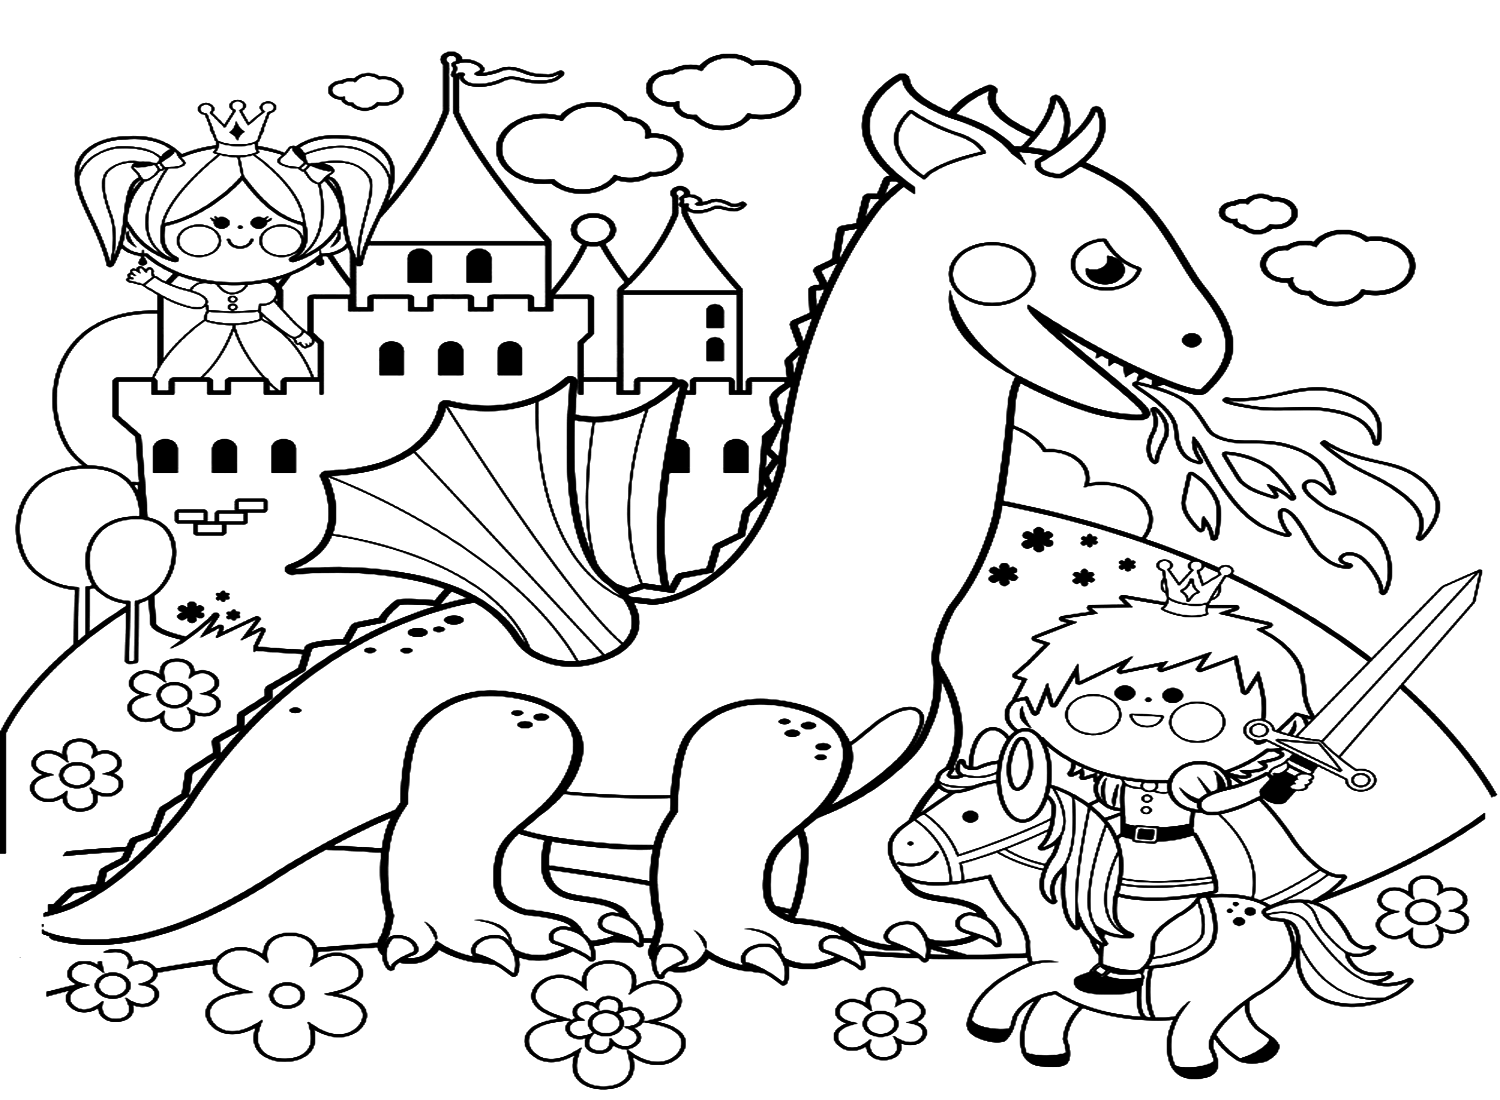 Dragon Coloring page for kids - Coloring Online Free